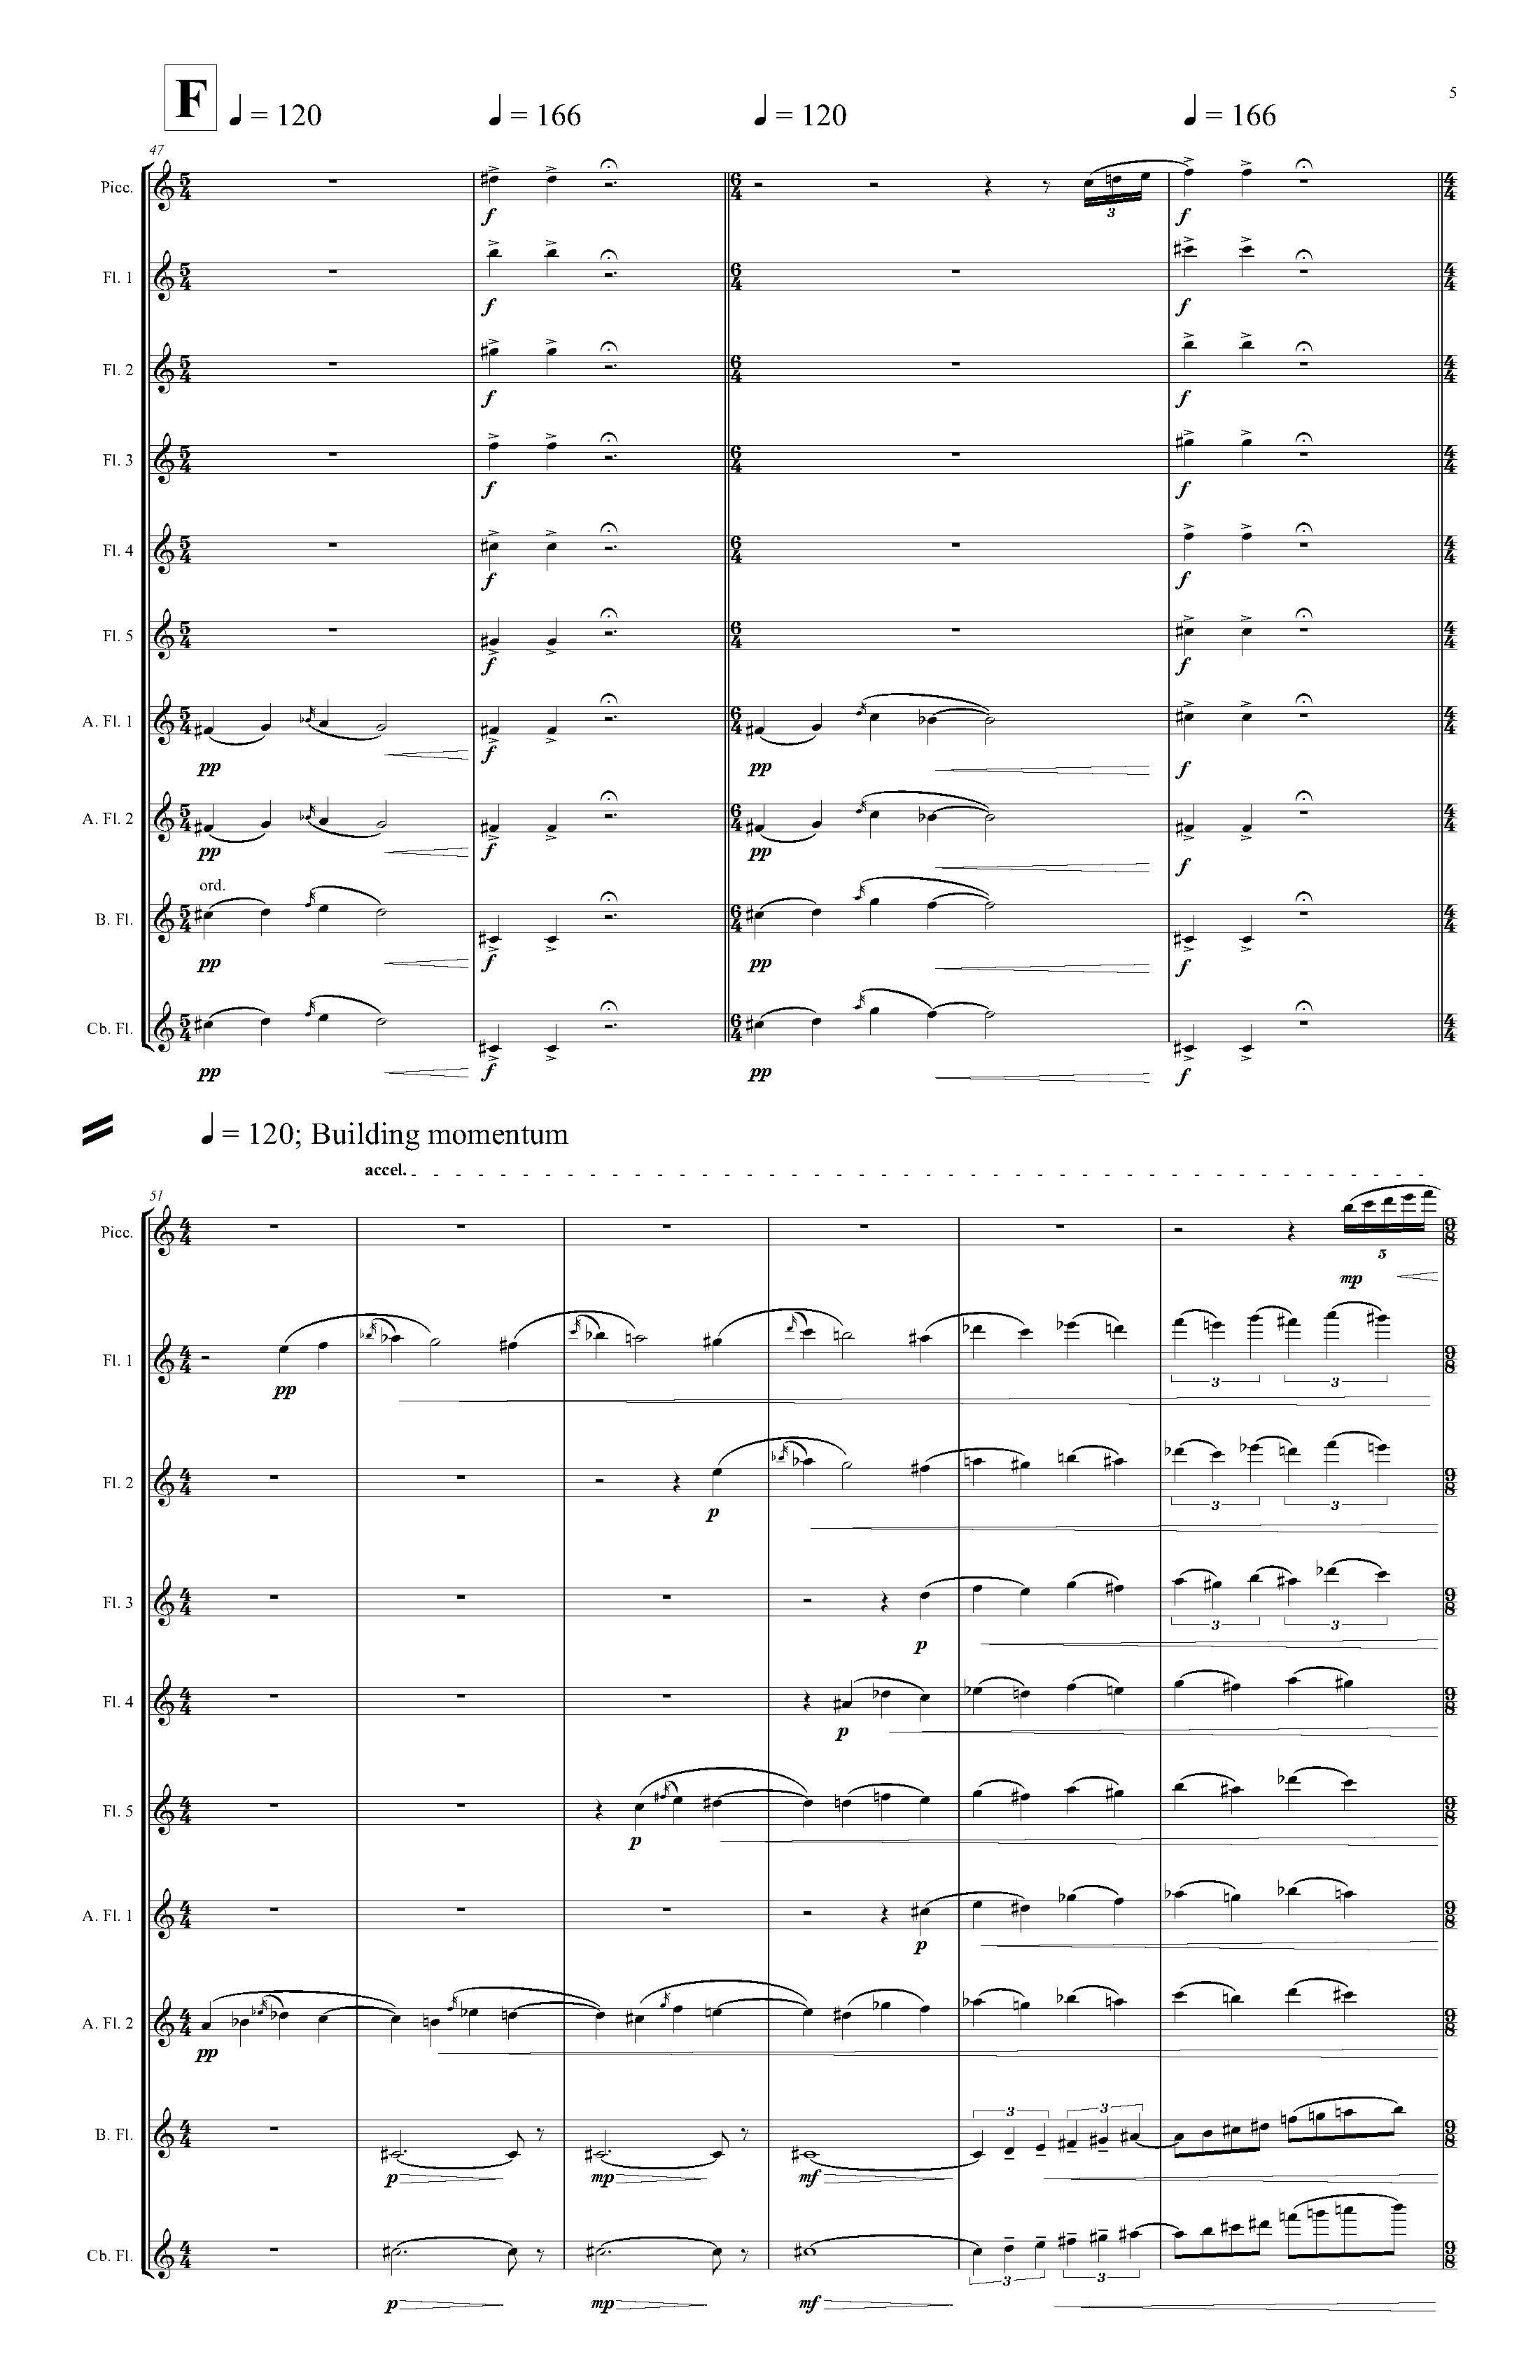 PIPES - Complete Score_Page_11.jpg